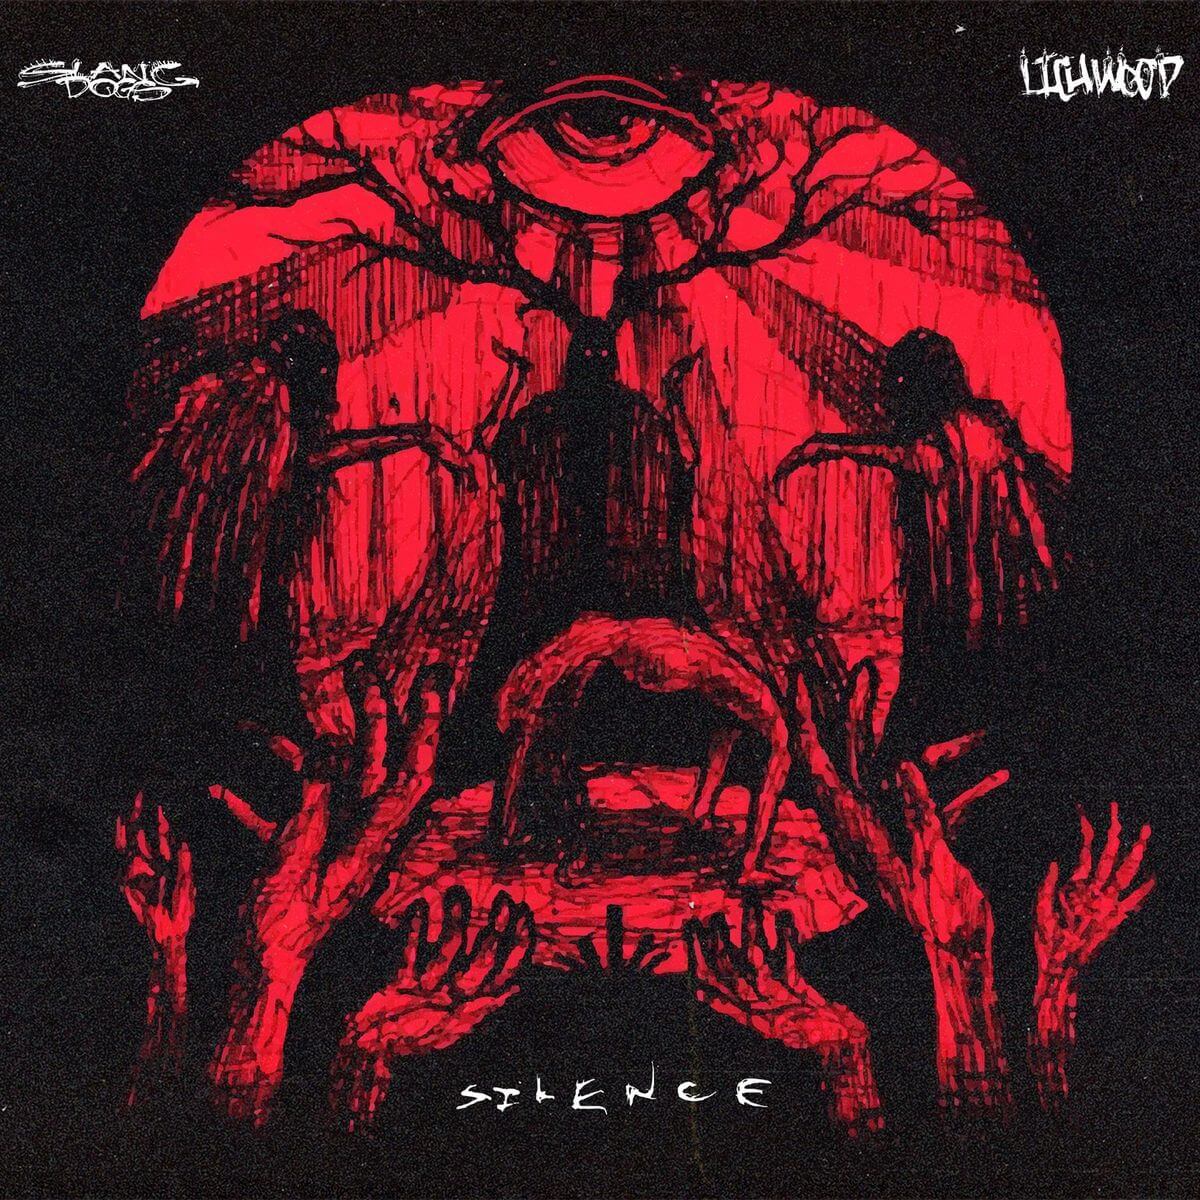 Slang Dogs and Lichwood Go Stupid Quick with ‘Silence’